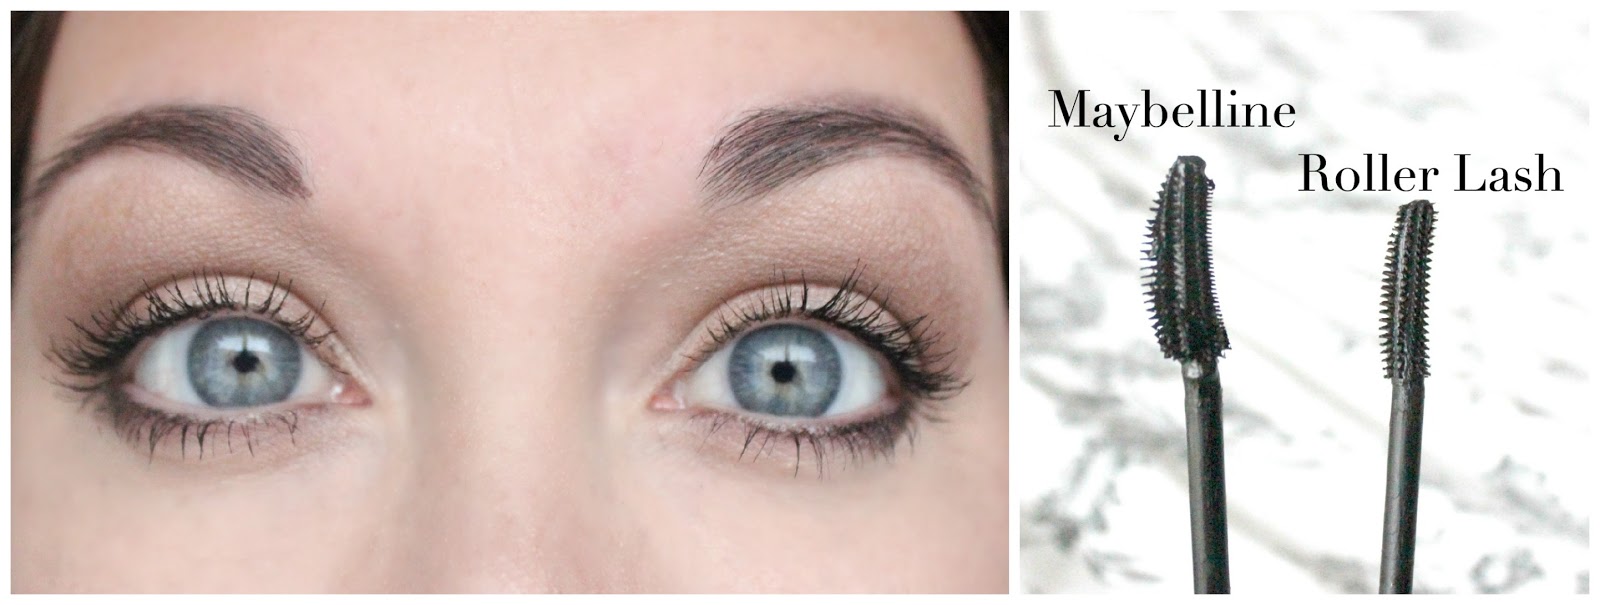 Elle Sees Beauty Blogger In Atlanta This Or That Benefit Roller Lash Vs Maybelline Lash